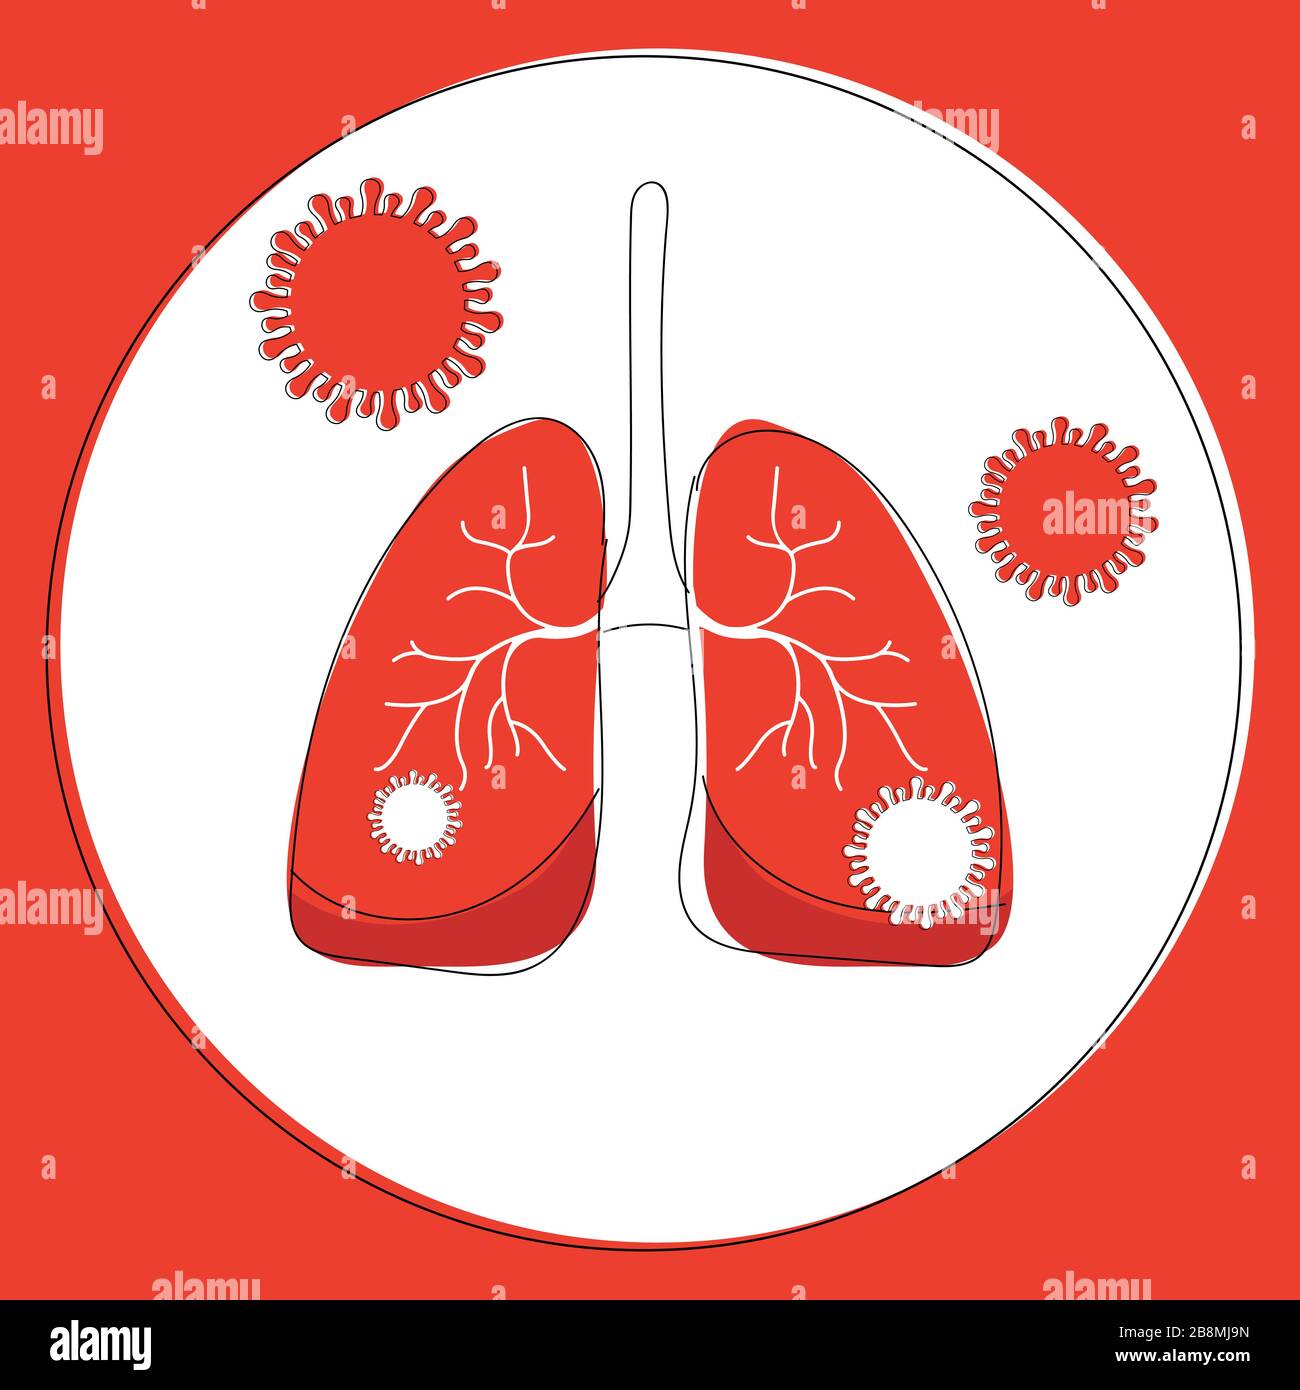 Infected lungs with bacterium illustration, coronavirus outbreak. Bacterial infection in body organs, pneumonia in the lungs, a respiratory disease Stock Vector